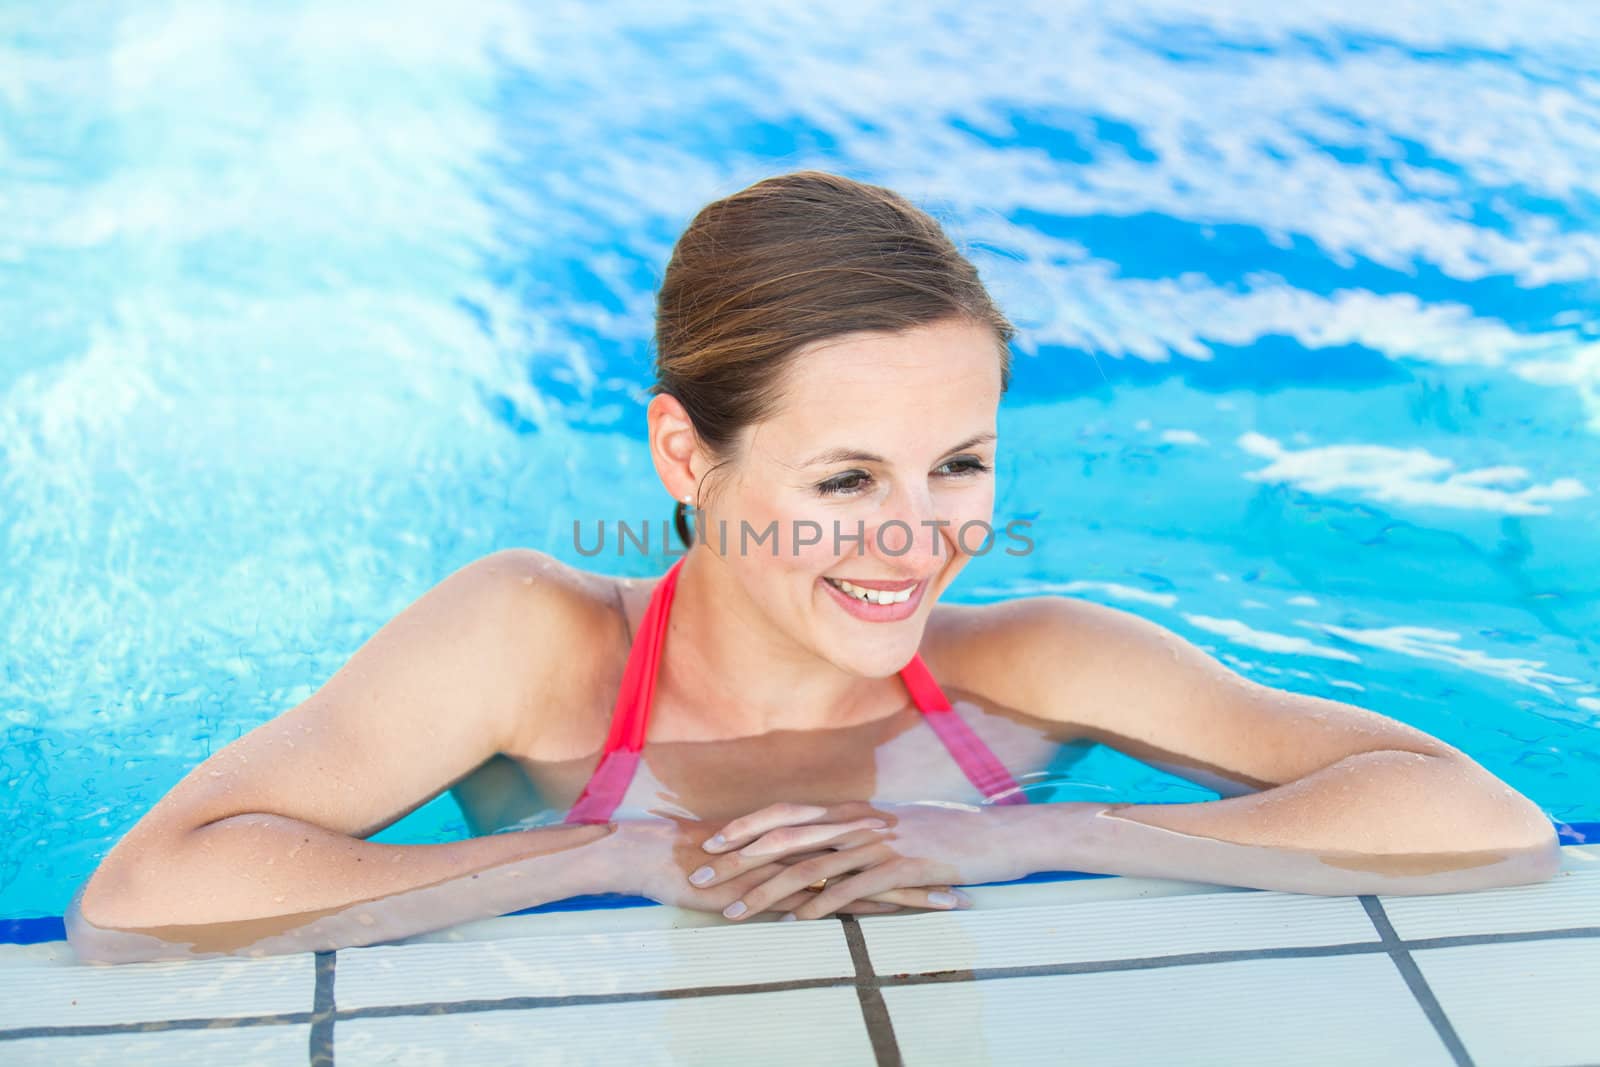 Portrait of a young woman relaxing in a swimming pool by viktor_cap